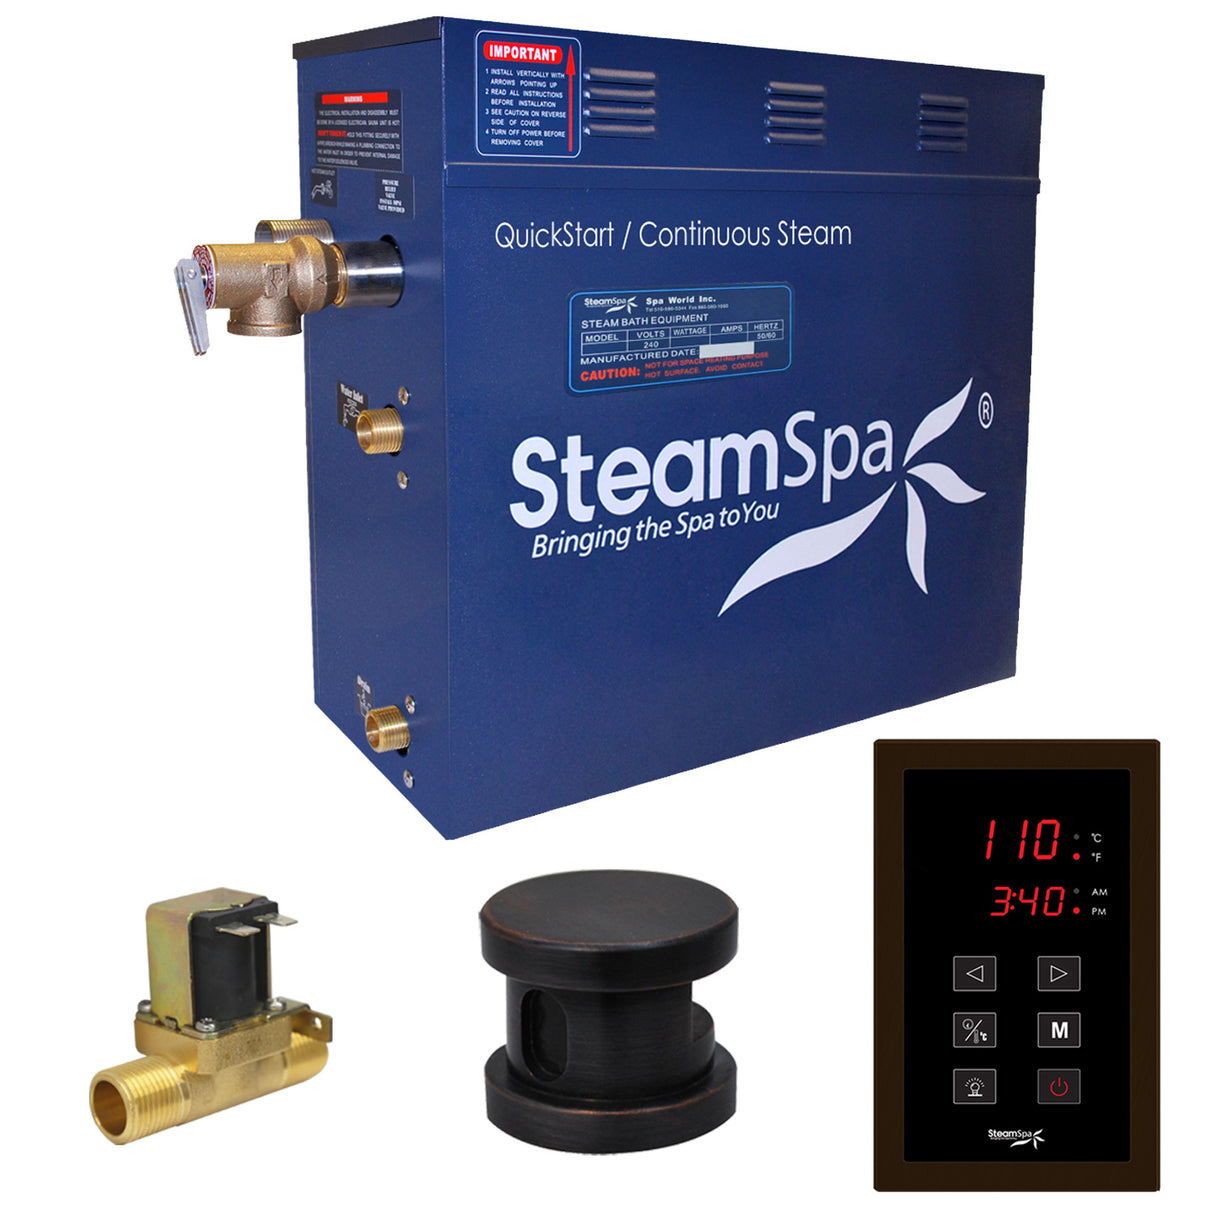 Steamspa Sentry Series 7.5KW QUICKSTART Steam Bath Generator Package in Oil Rubbed Bronze | Luxury Sauna Home Bath Steam Generator for Shower with Touch Screen, Steamhead, and Built-in Auto Drain | SNT750ORB-A SNT750ORB-A